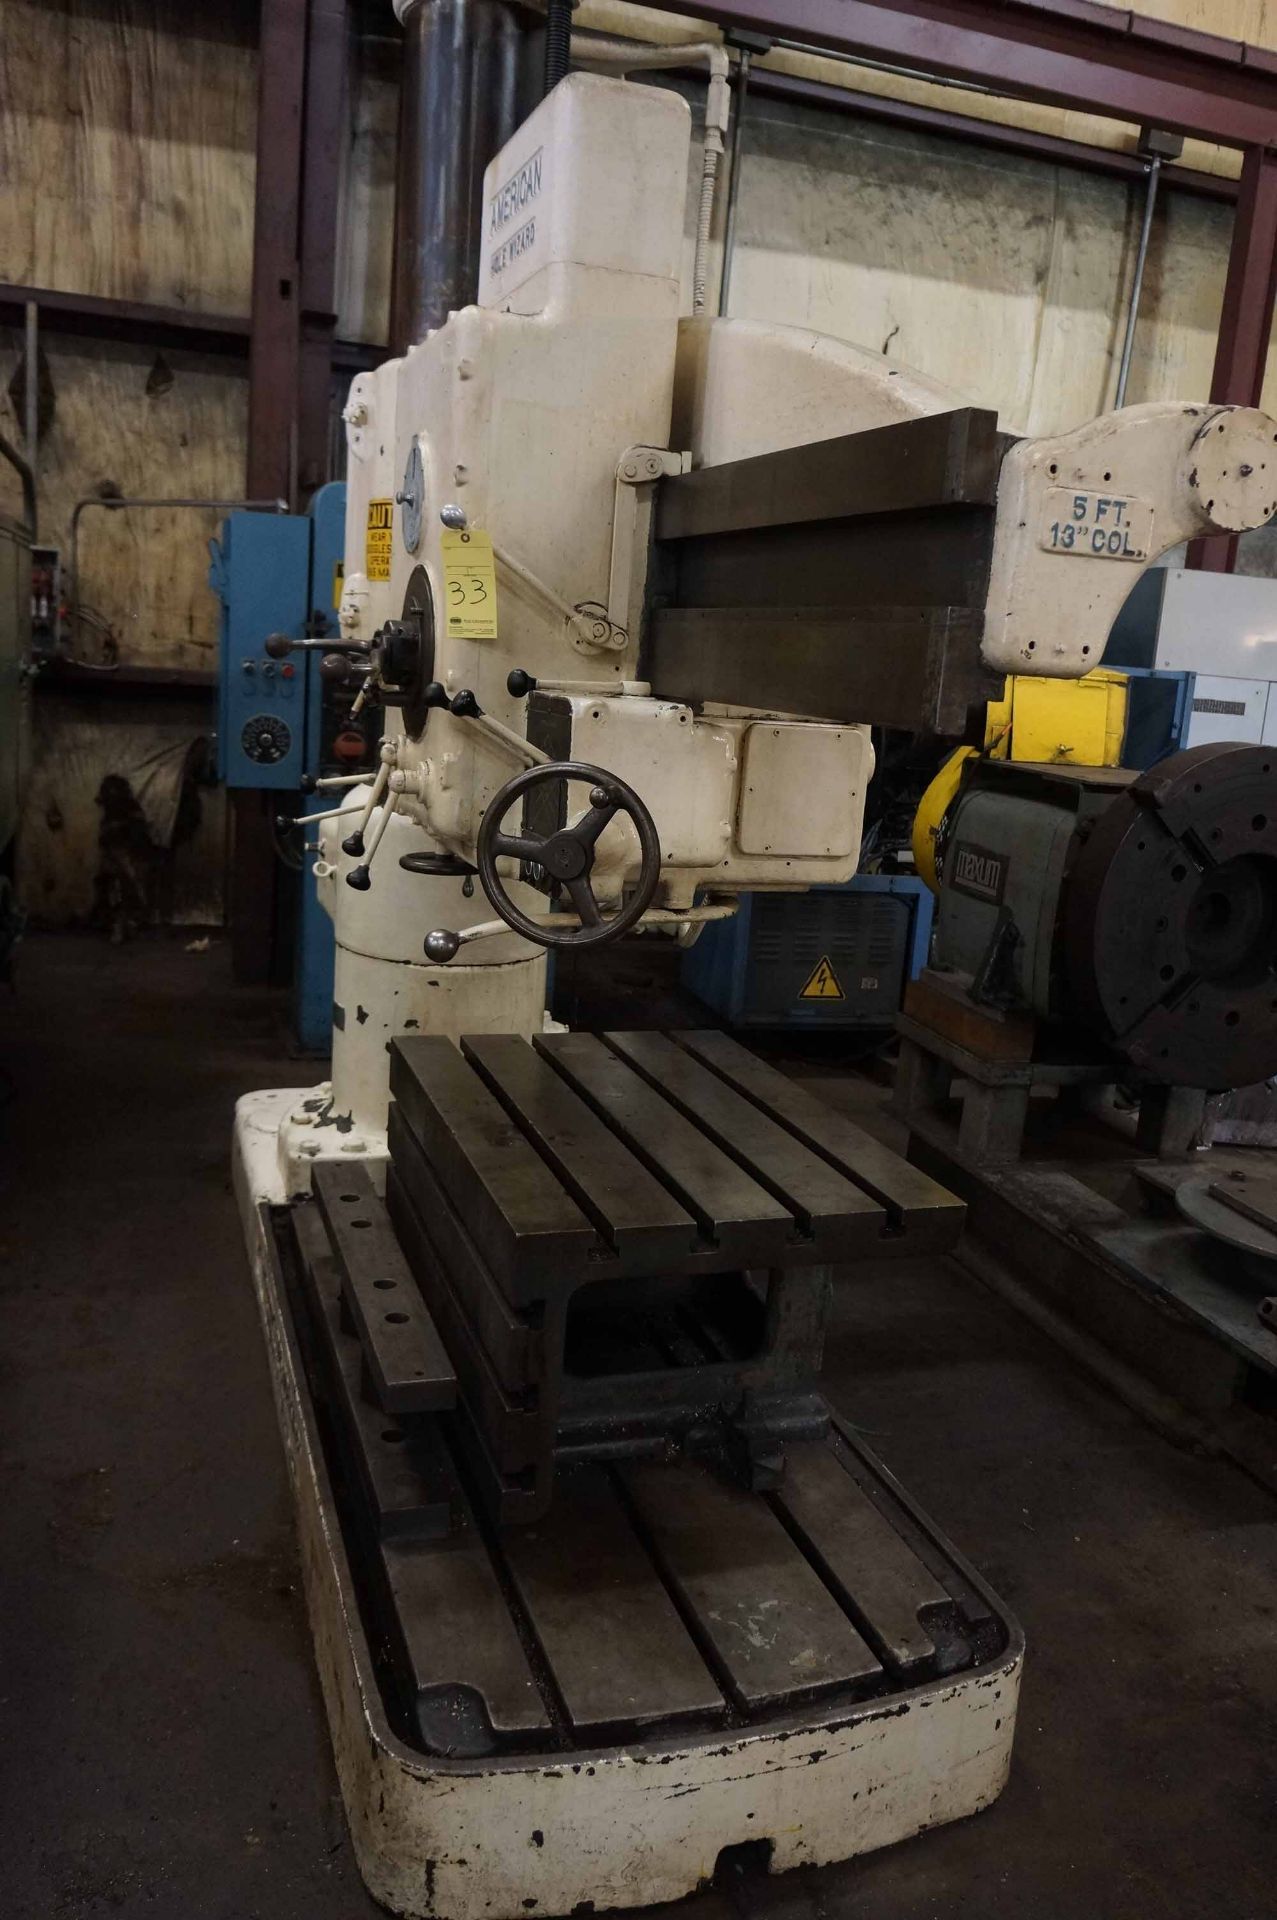 RADIAL ARM DRILL, AMERICAN HOLE WIZARD 5' X 13", spds: 20-1600 RPM, large plain box table, S/N